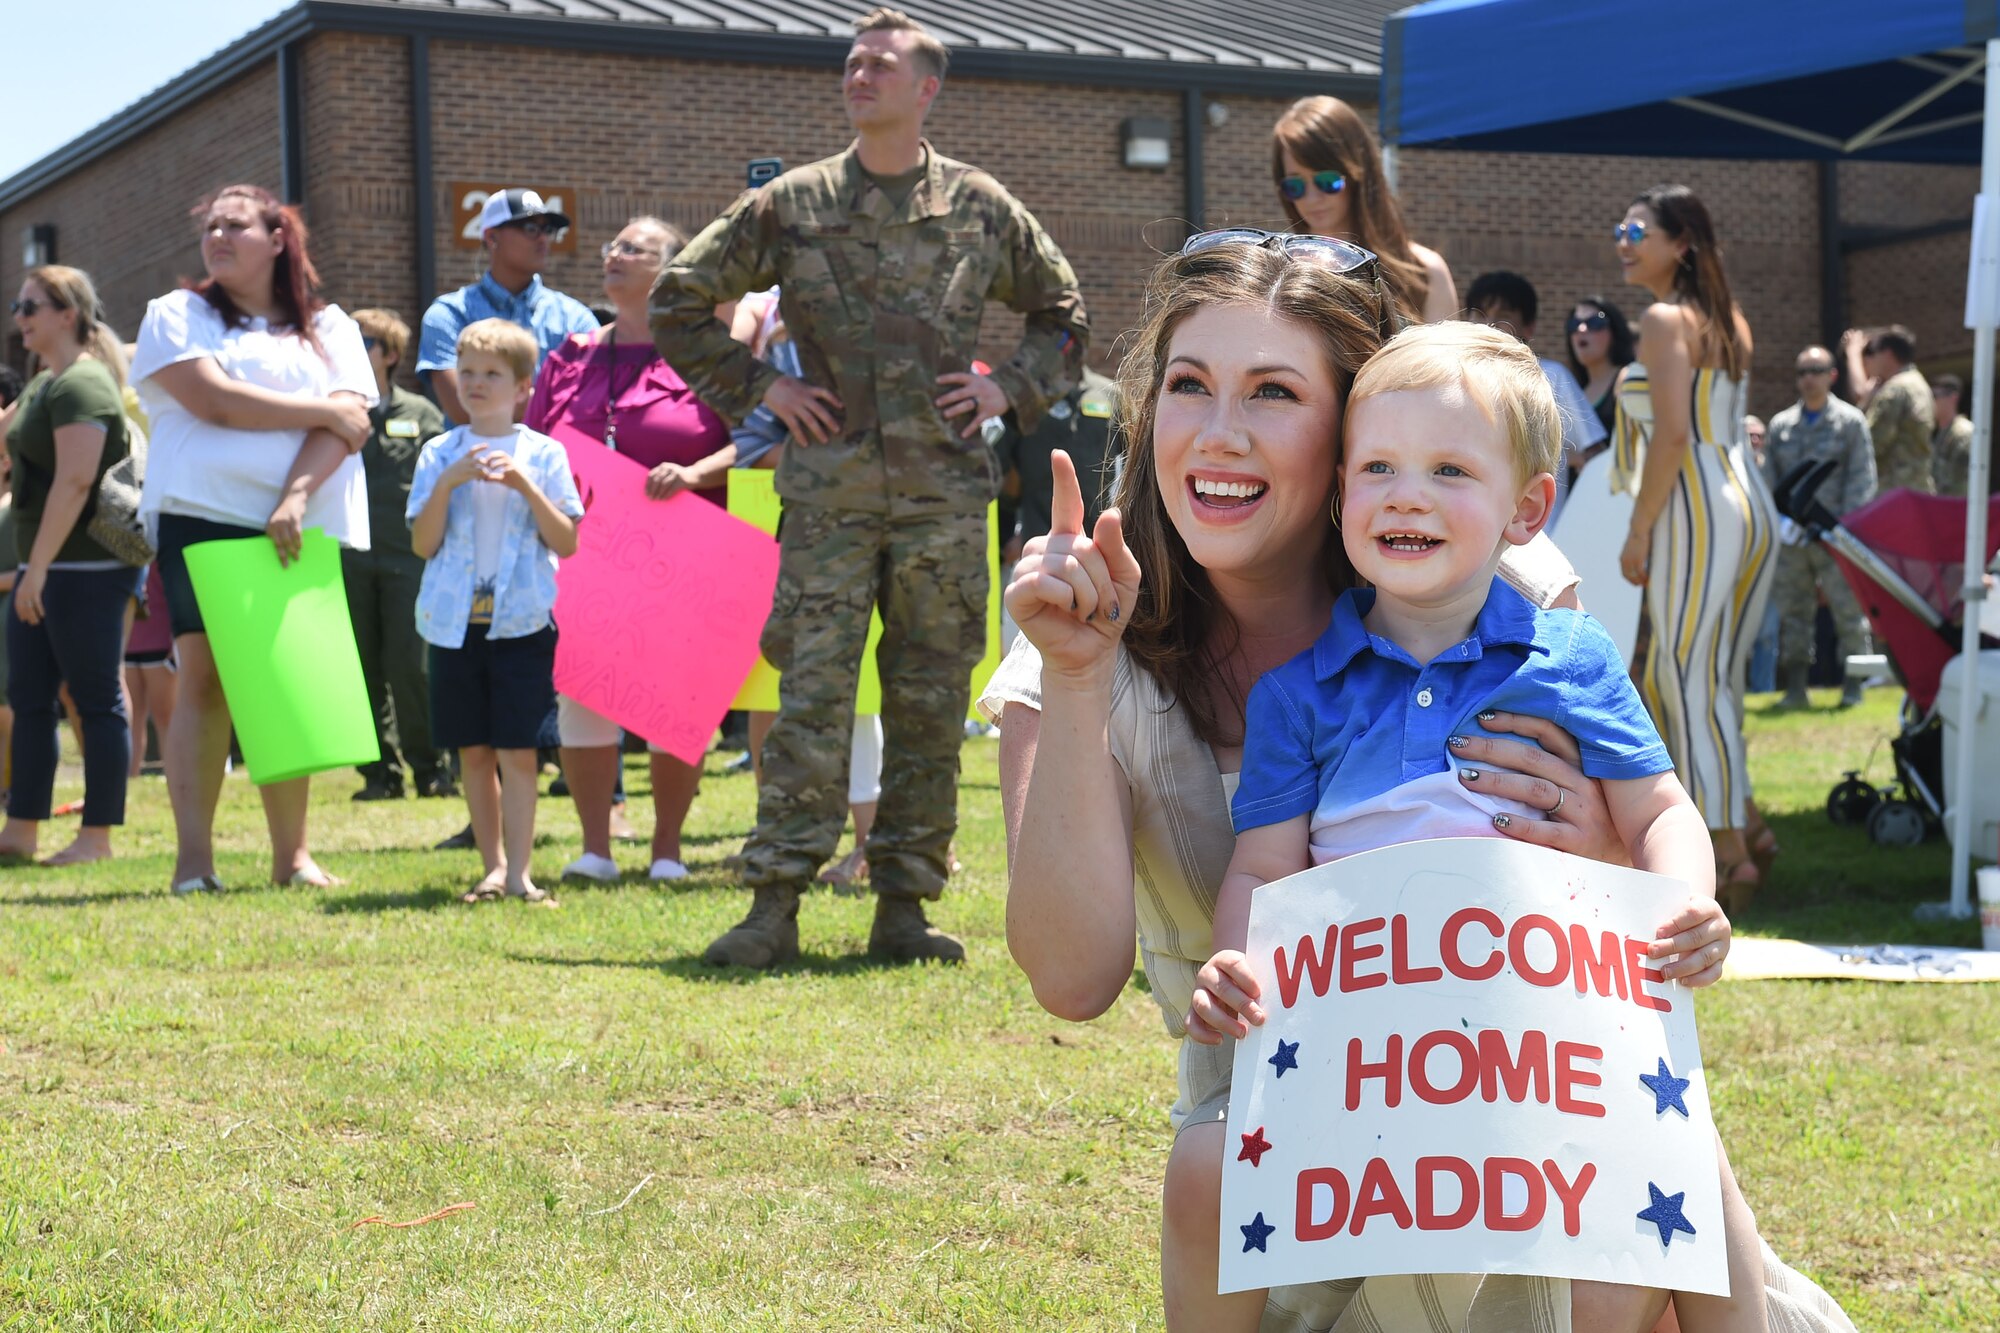 A mother and her son await the return of an Airman.